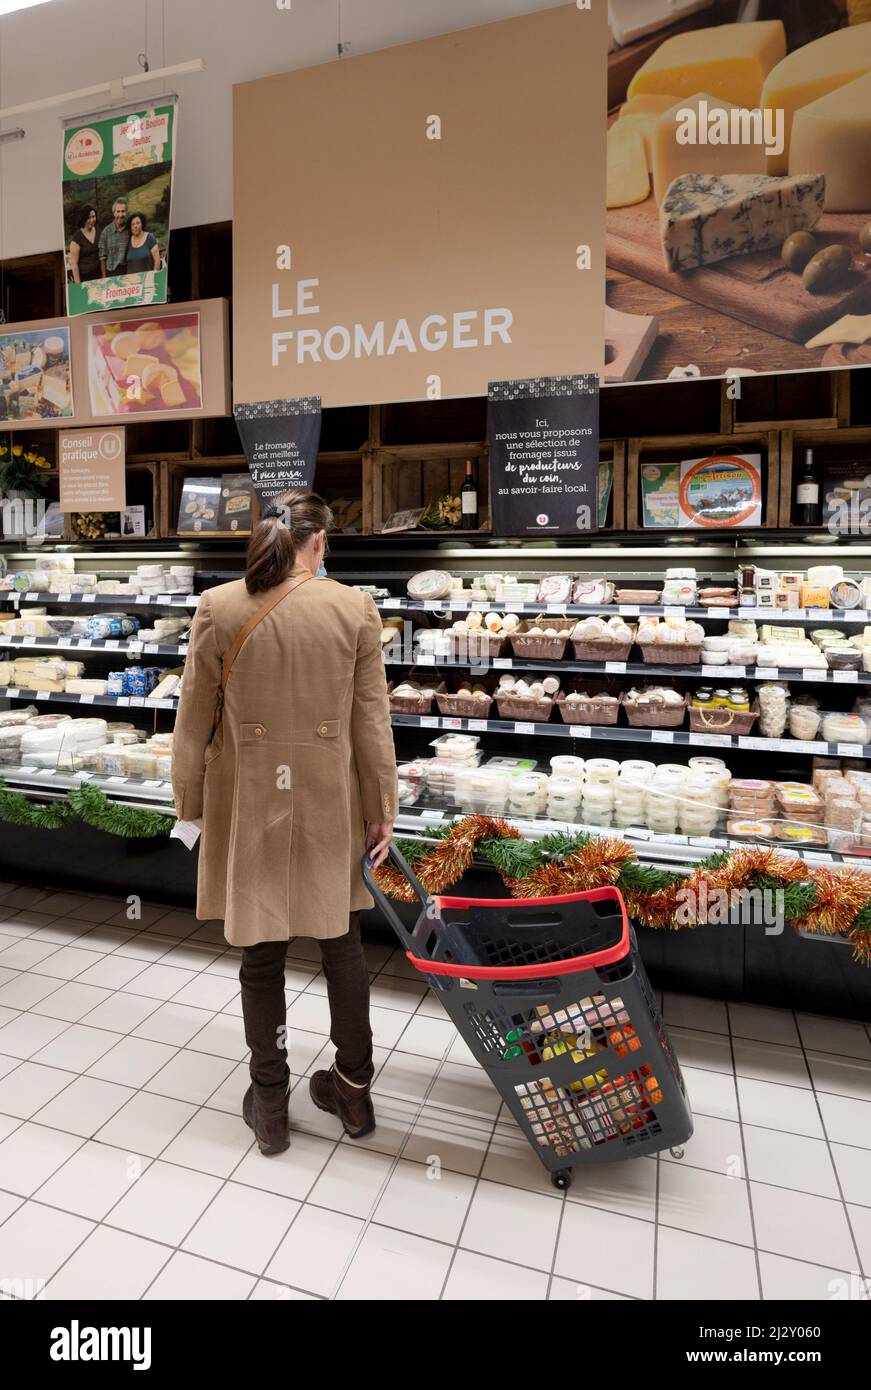 Super U supermarket: woman, customer viewed from behind in the cheese department Stock Photo